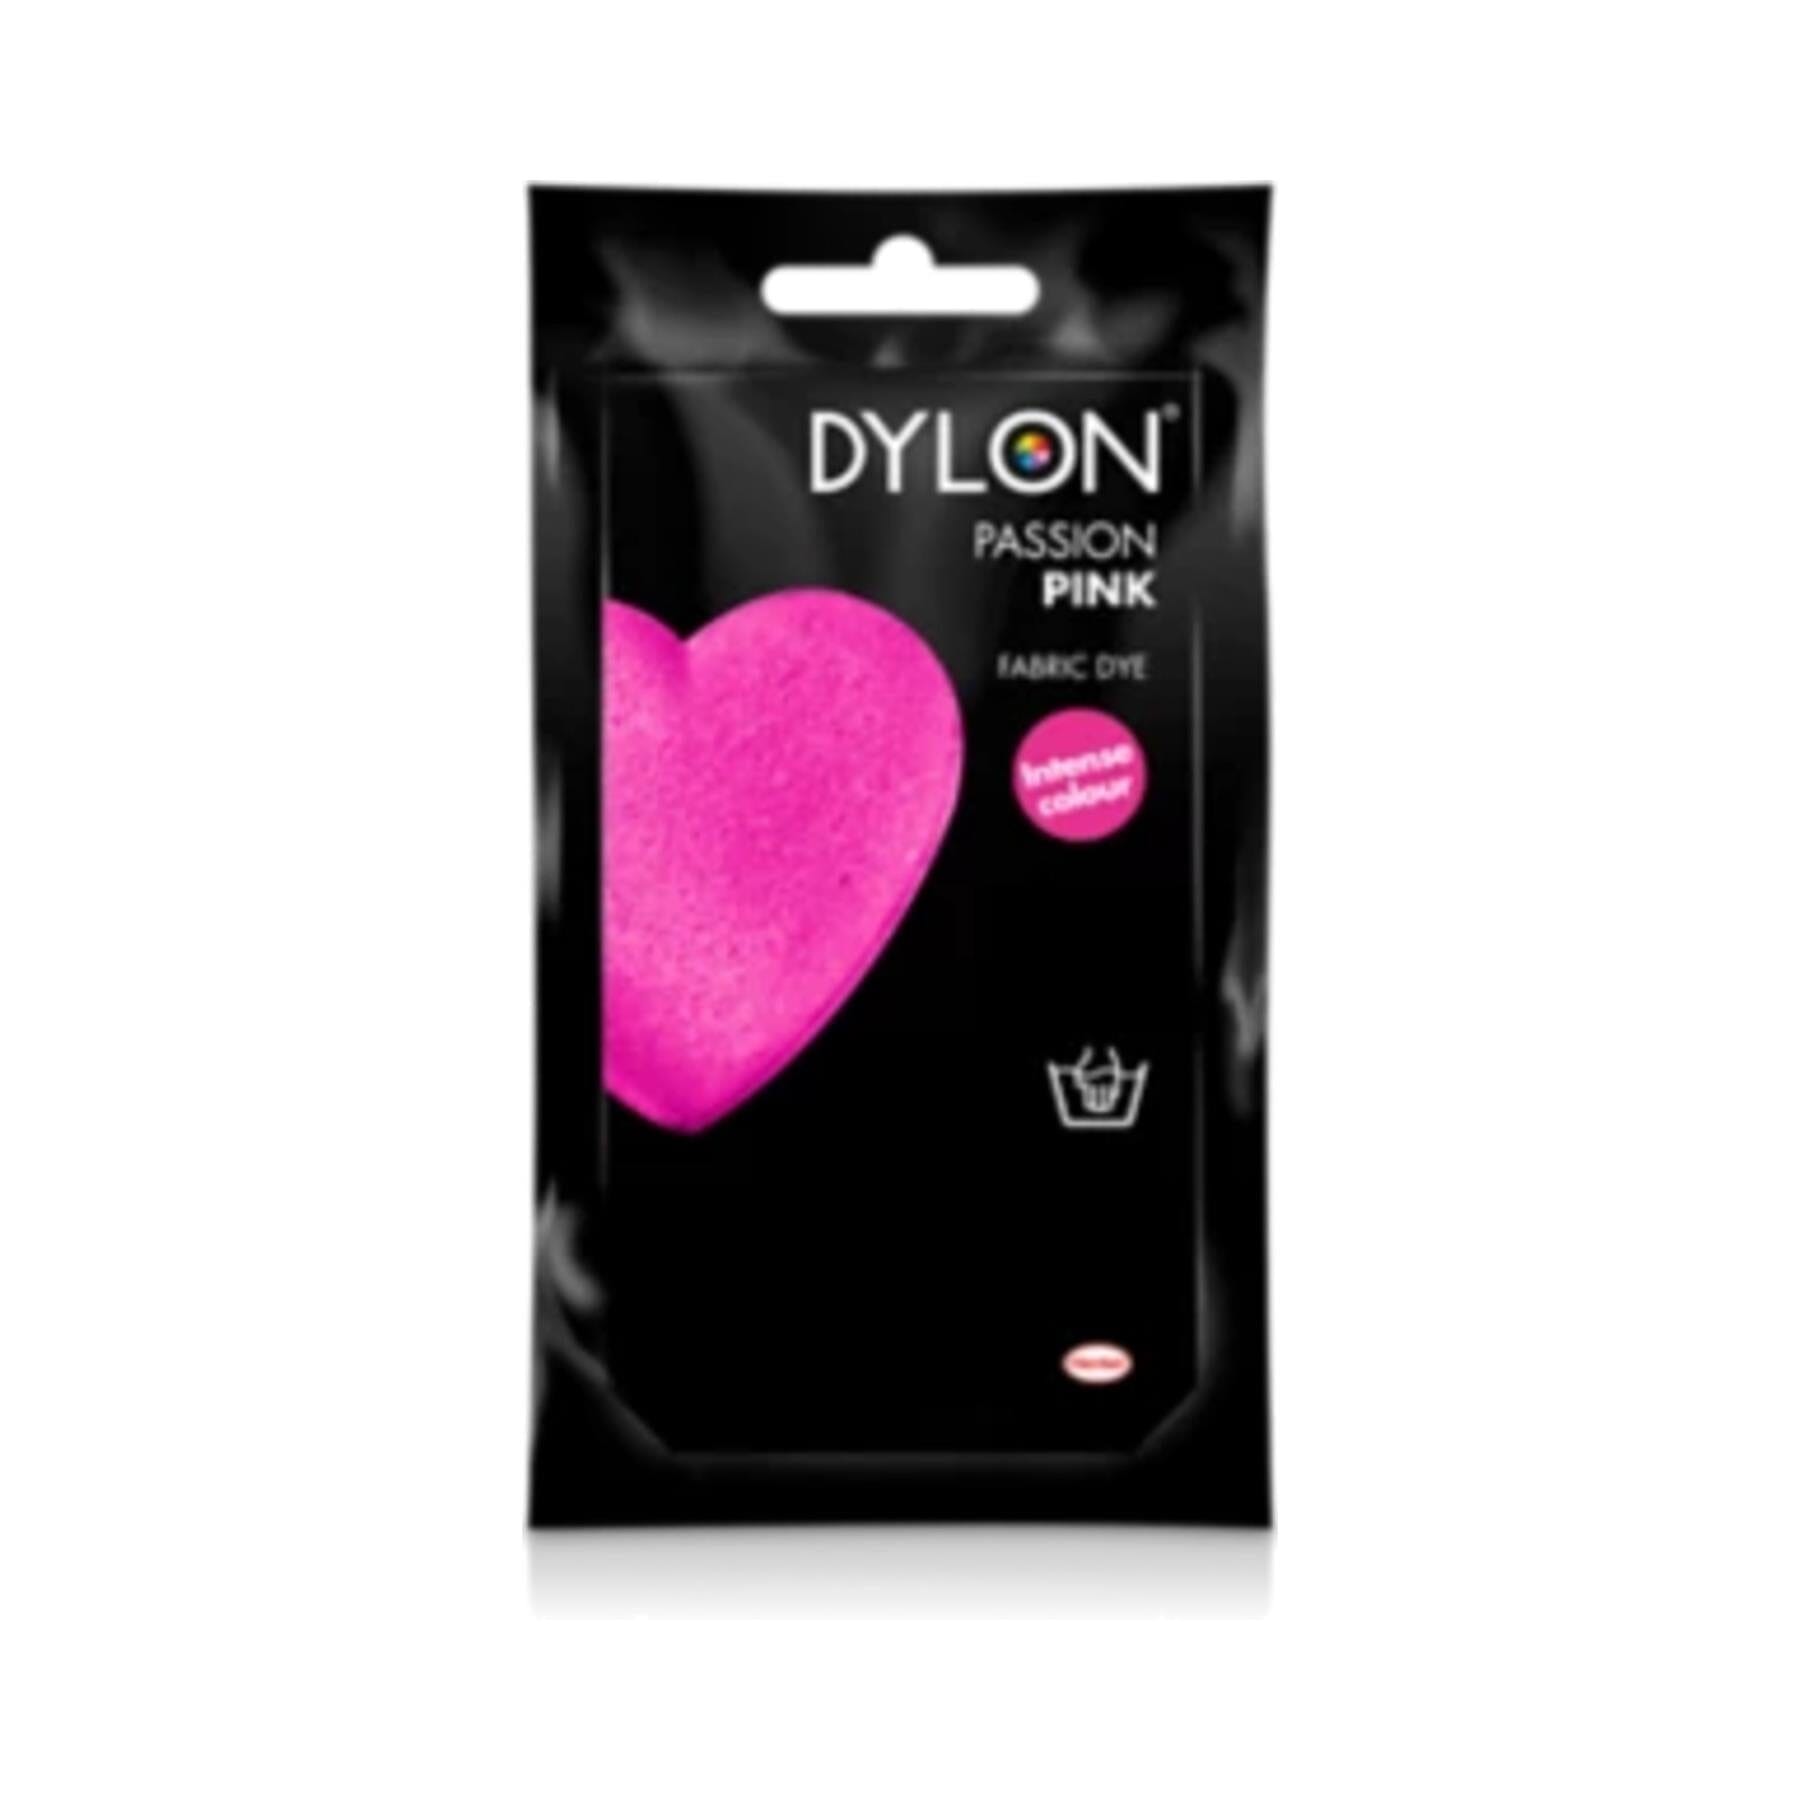 Dylon Hand Dye Sachet Passion Pink Fabric Dyes | Snape & Sons